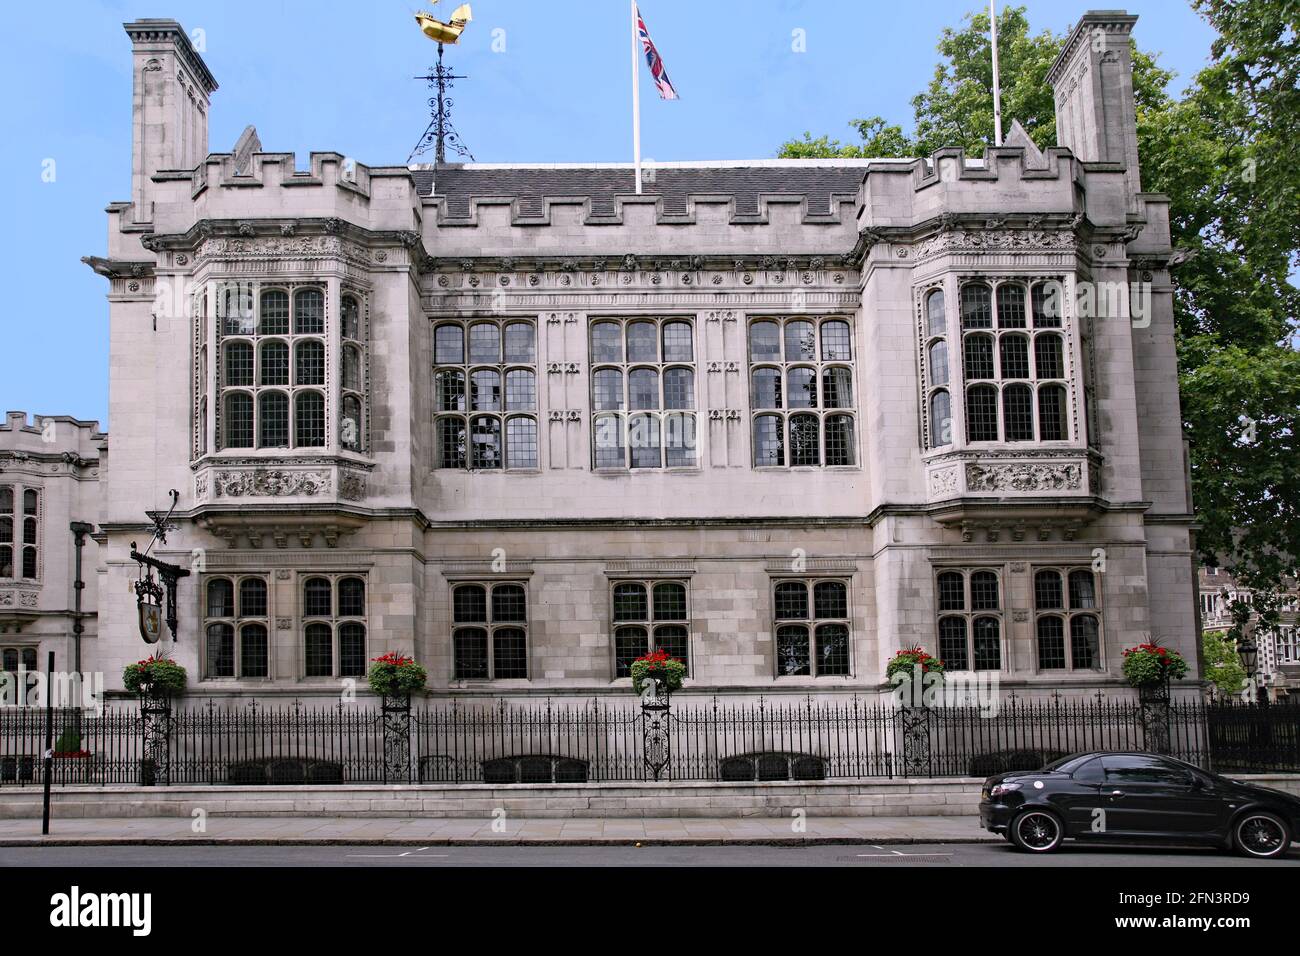 Two Temple Place,  neo-Gothic mansion was built in London overlooking the Thames in 1895 for William Waldorf Astor. Stock Photo